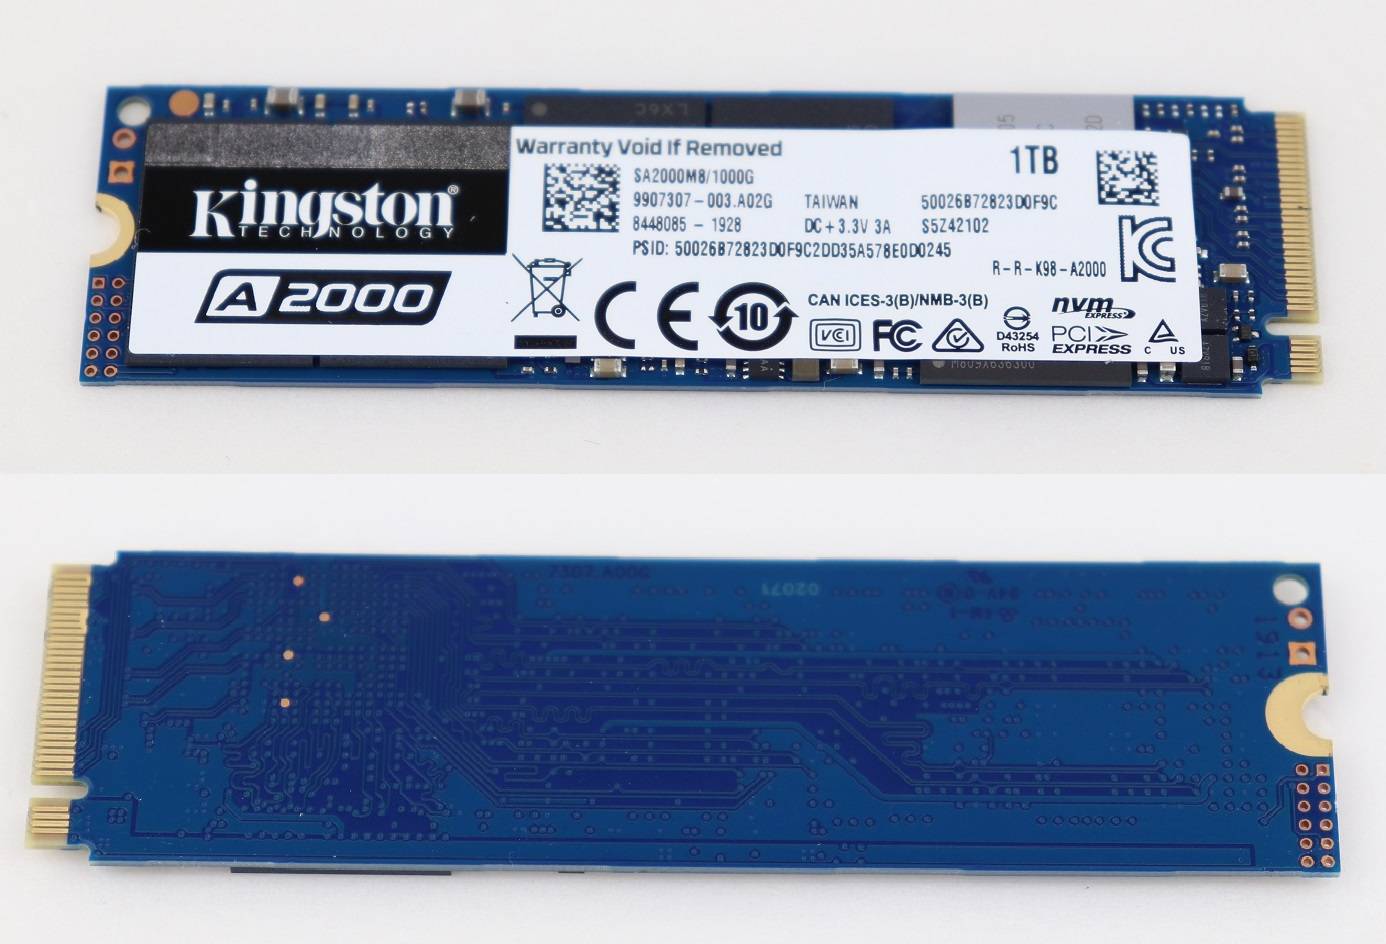 Panda crude oil Earthenware Unboxing and Review of Kingston A2000 1TB PCIe NVMe SSD | UnbxTech